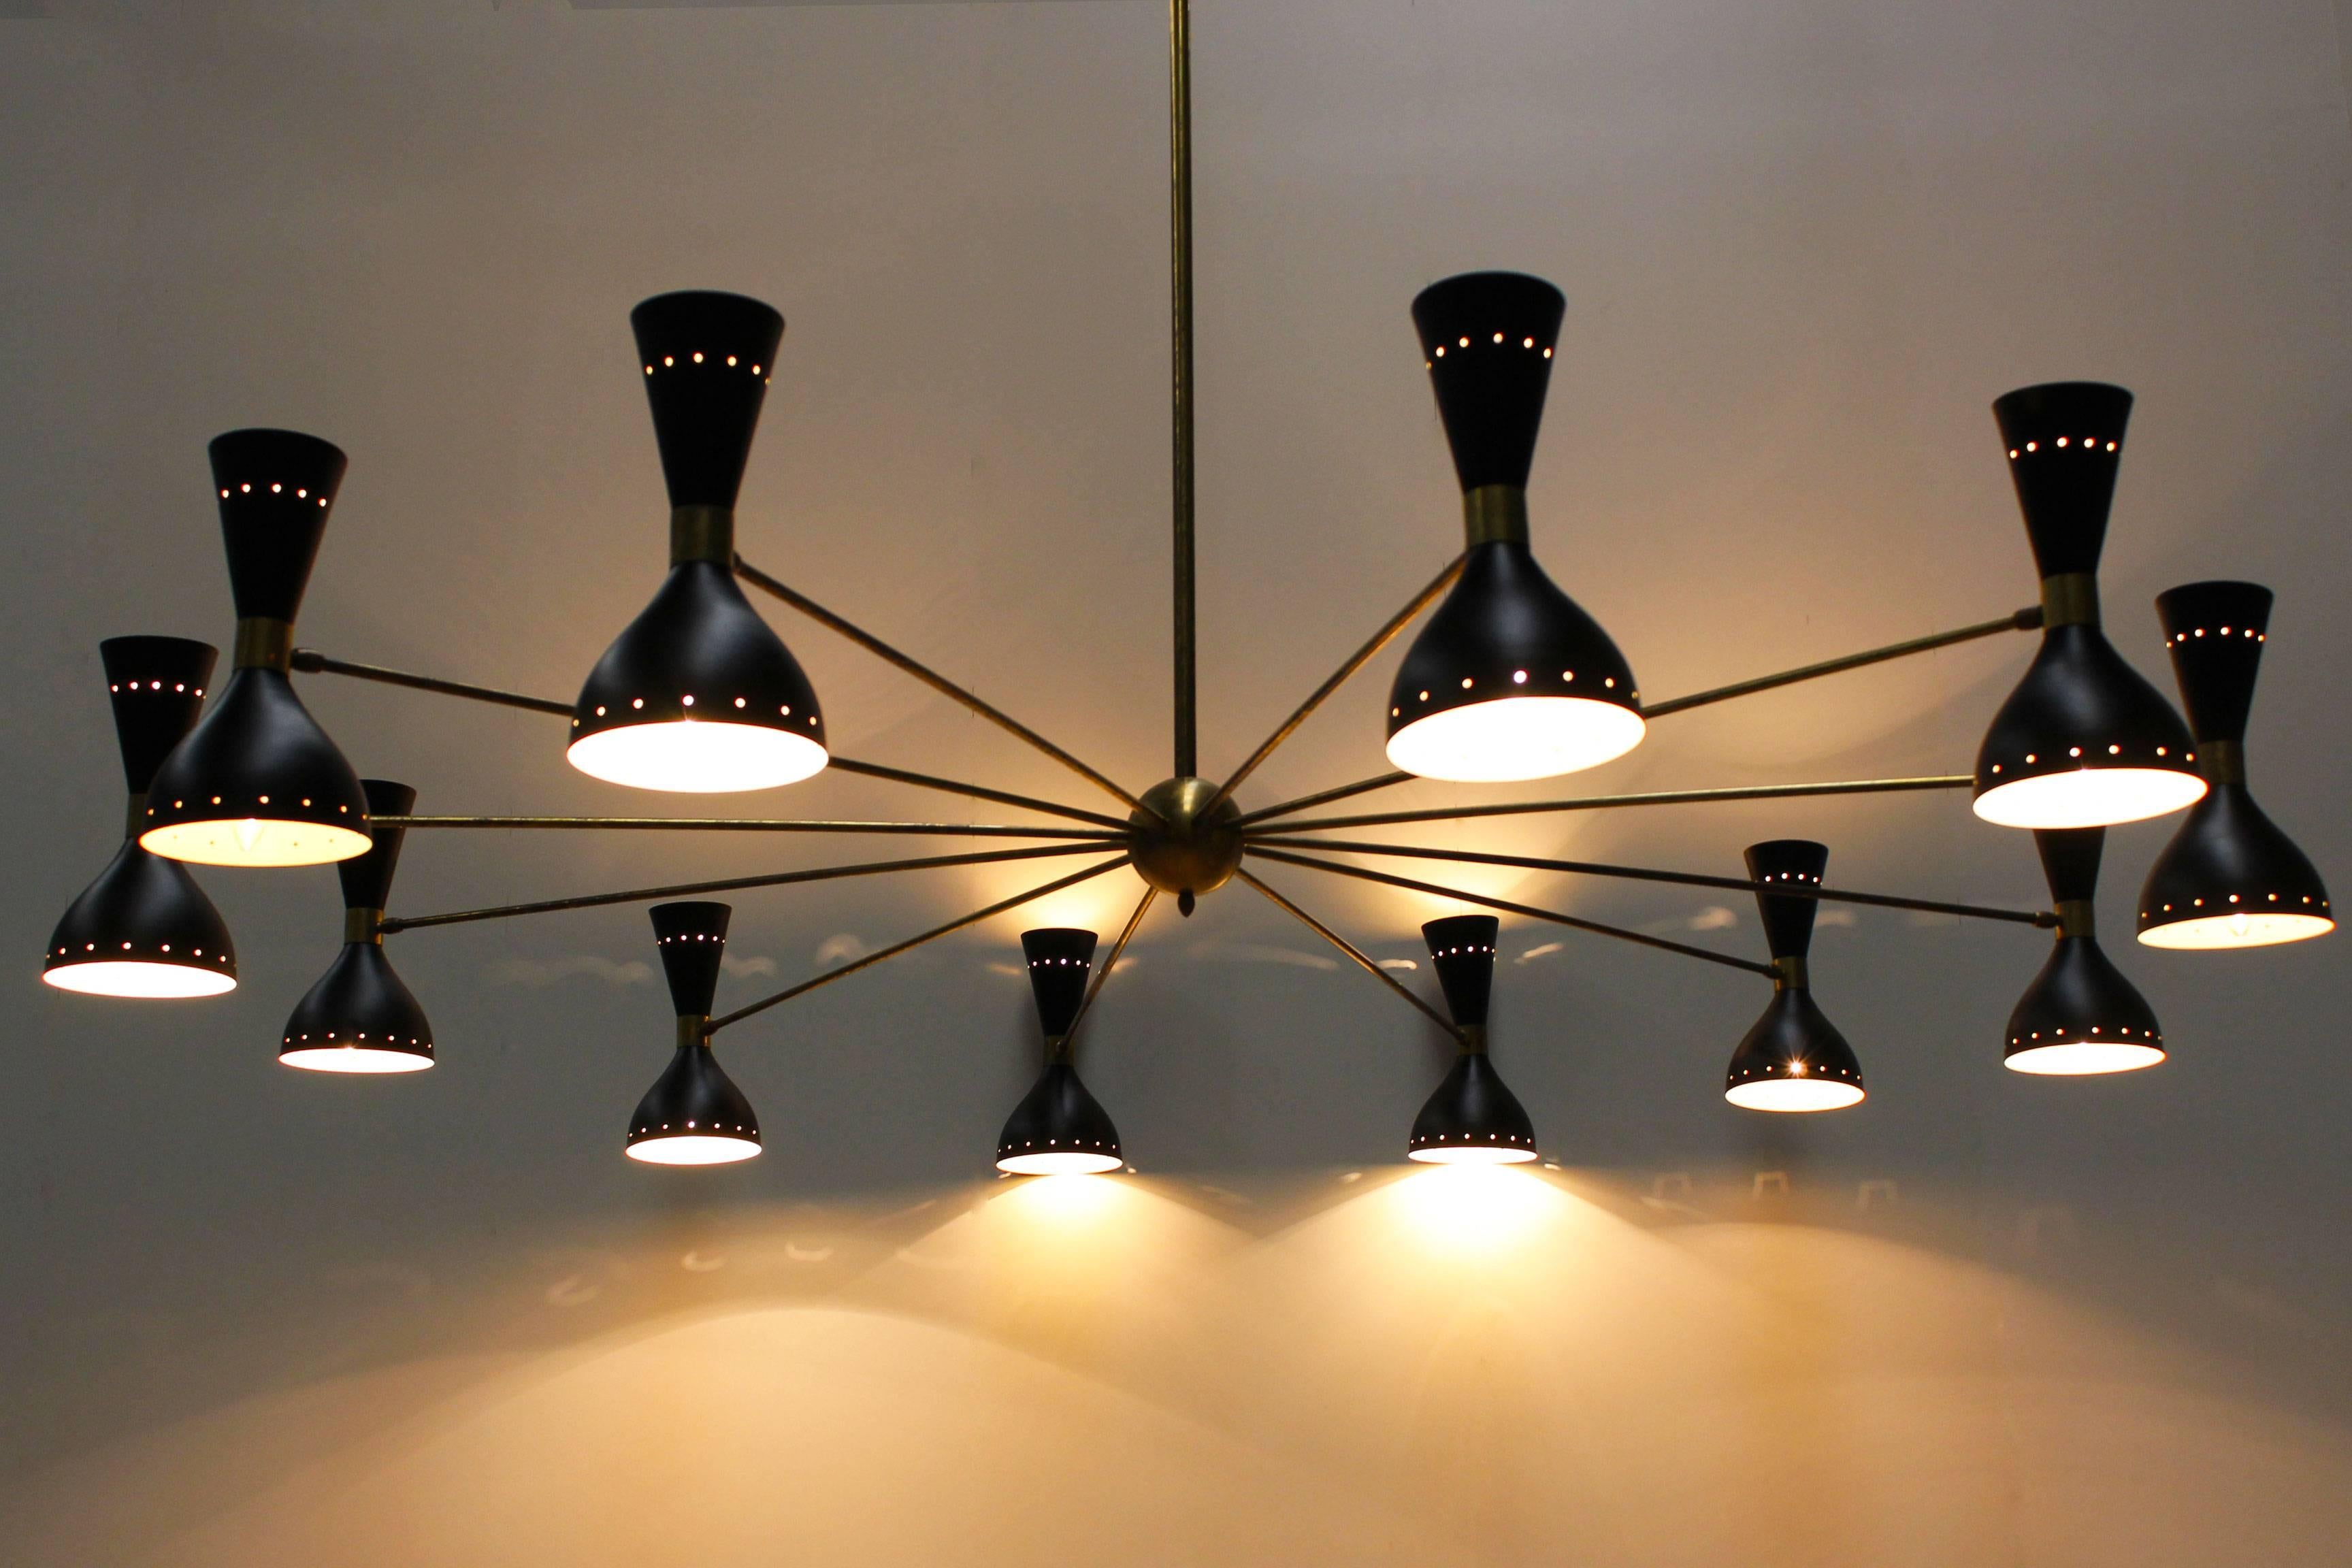 Massive Italian chandelier midcentury 1950s Stilnovo style with a diameter of 190 cm. The chandelier has 24 sockets, 12 pointing upwards and 12 downwards. The chandelier have a brass frame and black metal shades. Its minimalistic shape make it great